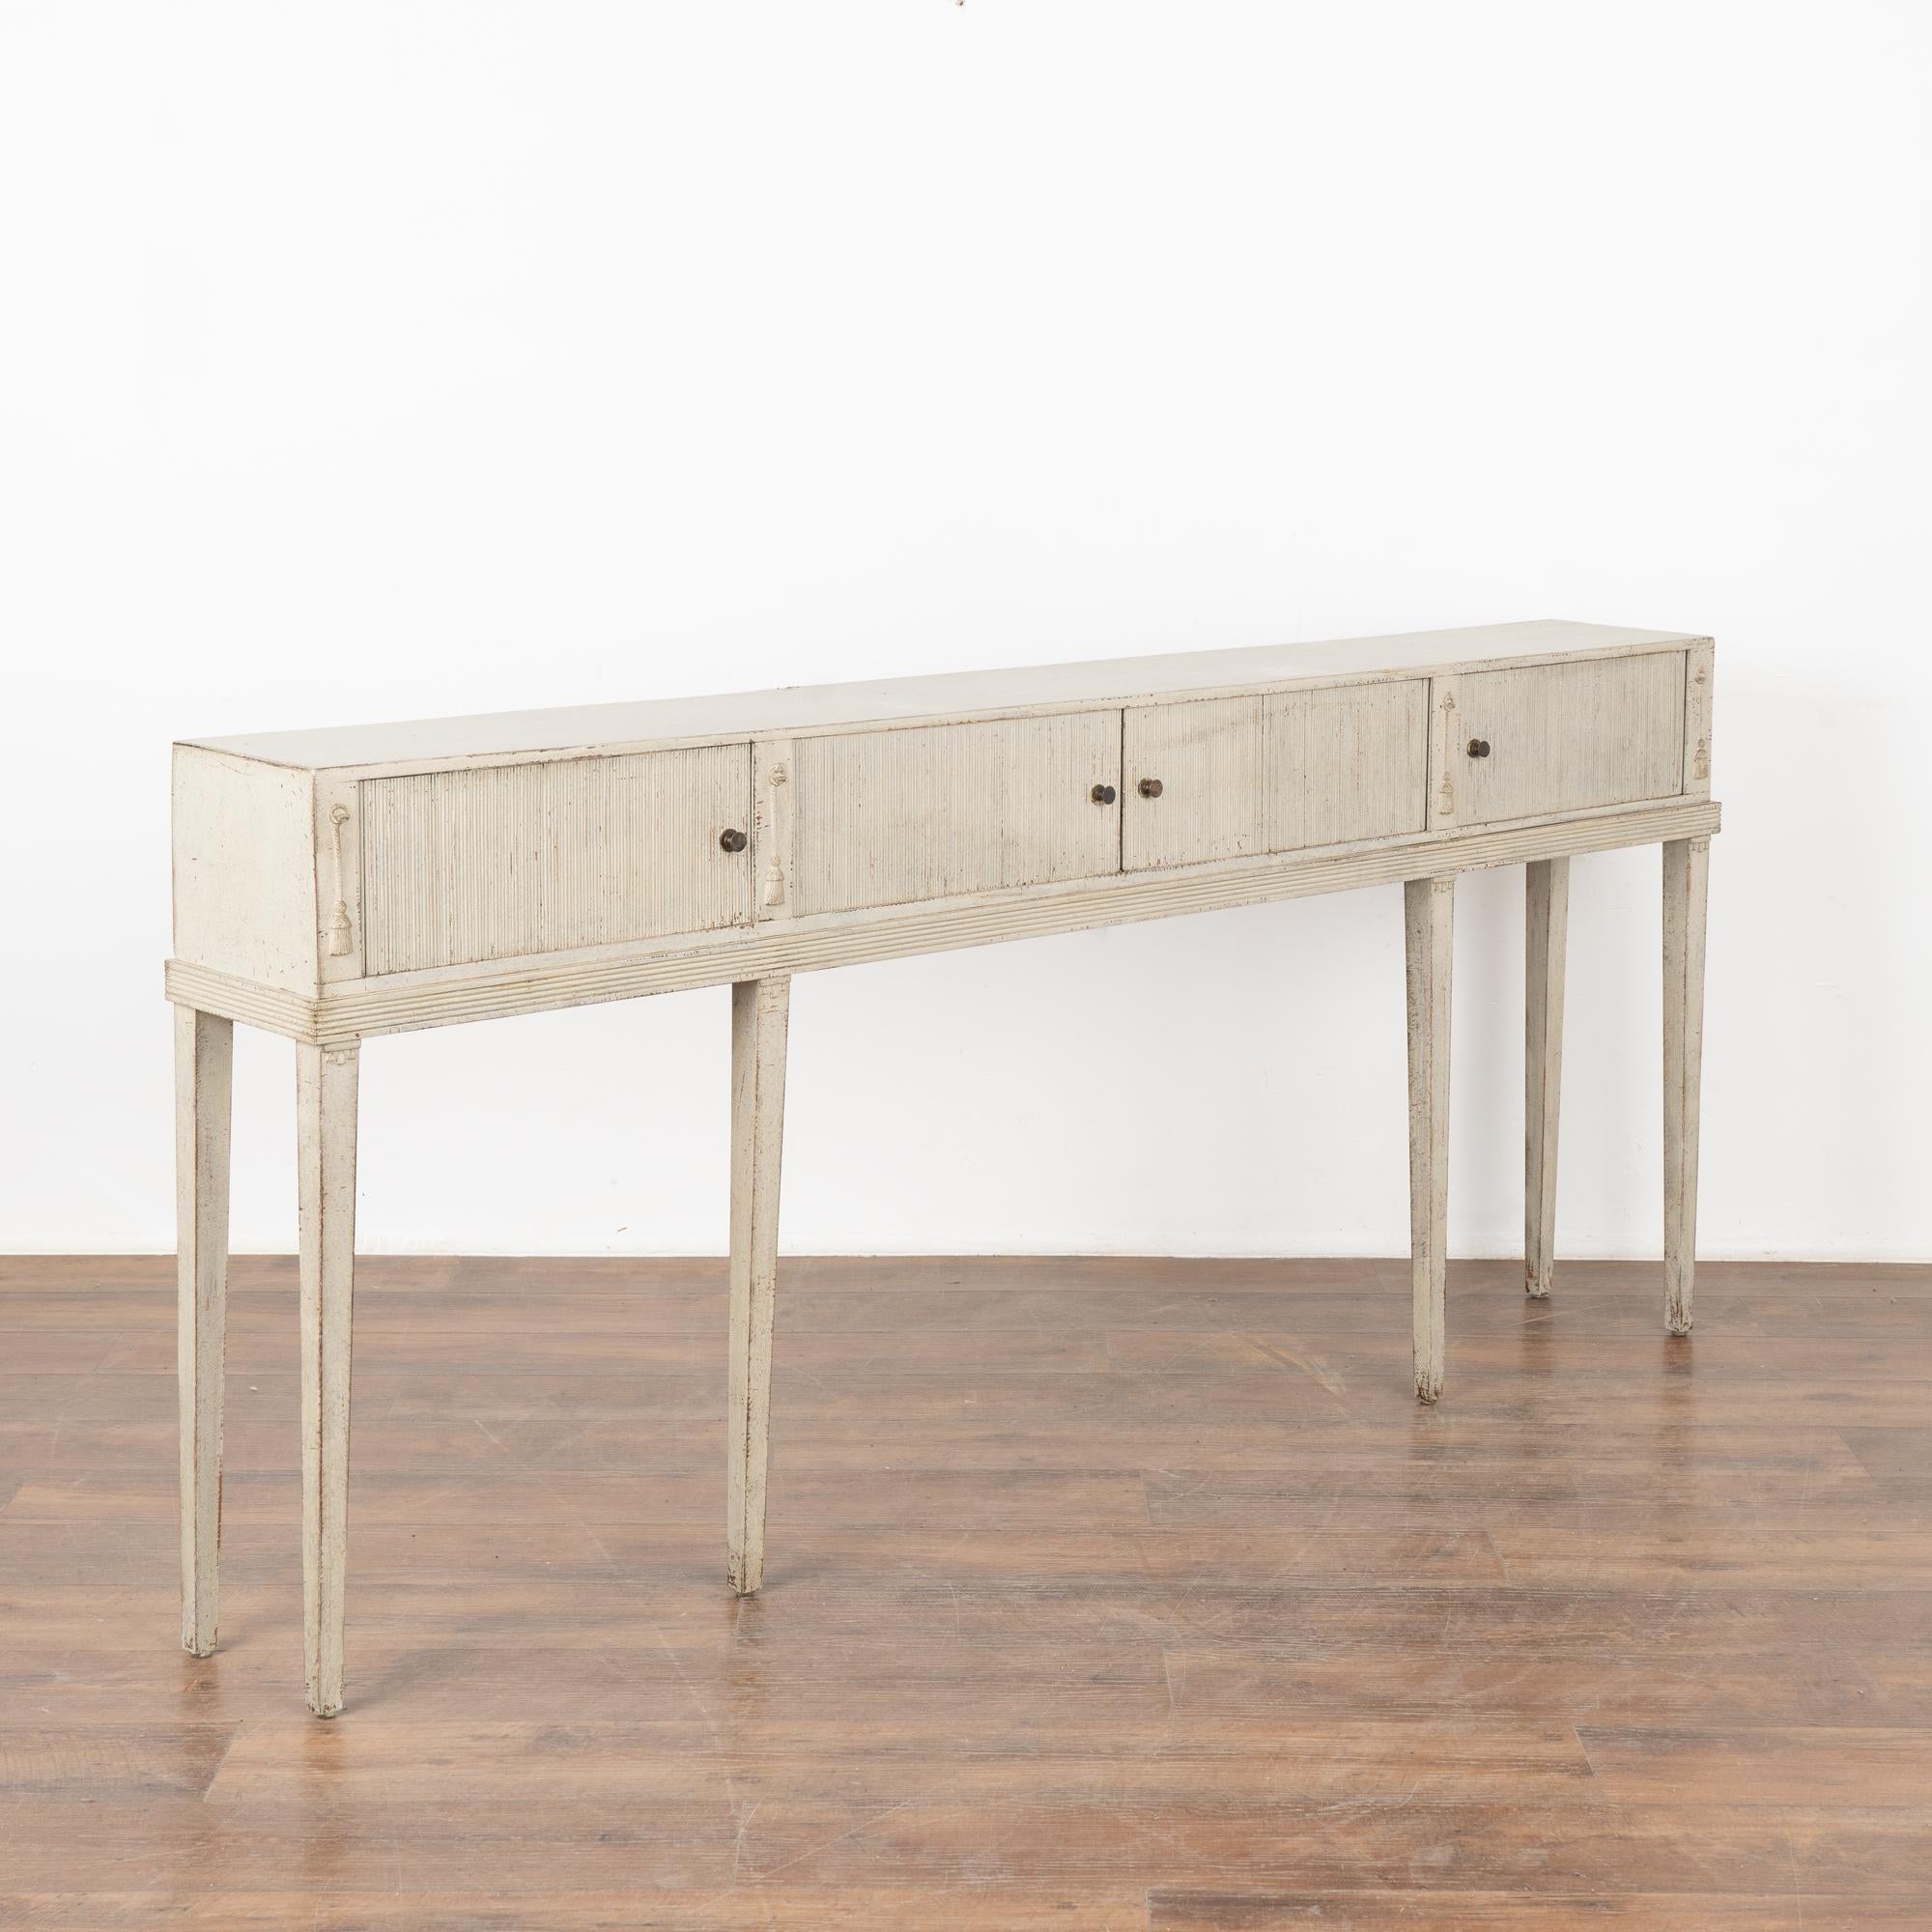 Elegant antique sideboard from Sweden with six elongated tapered legs, in the Gustavian style and extremely narrow at only 10.25